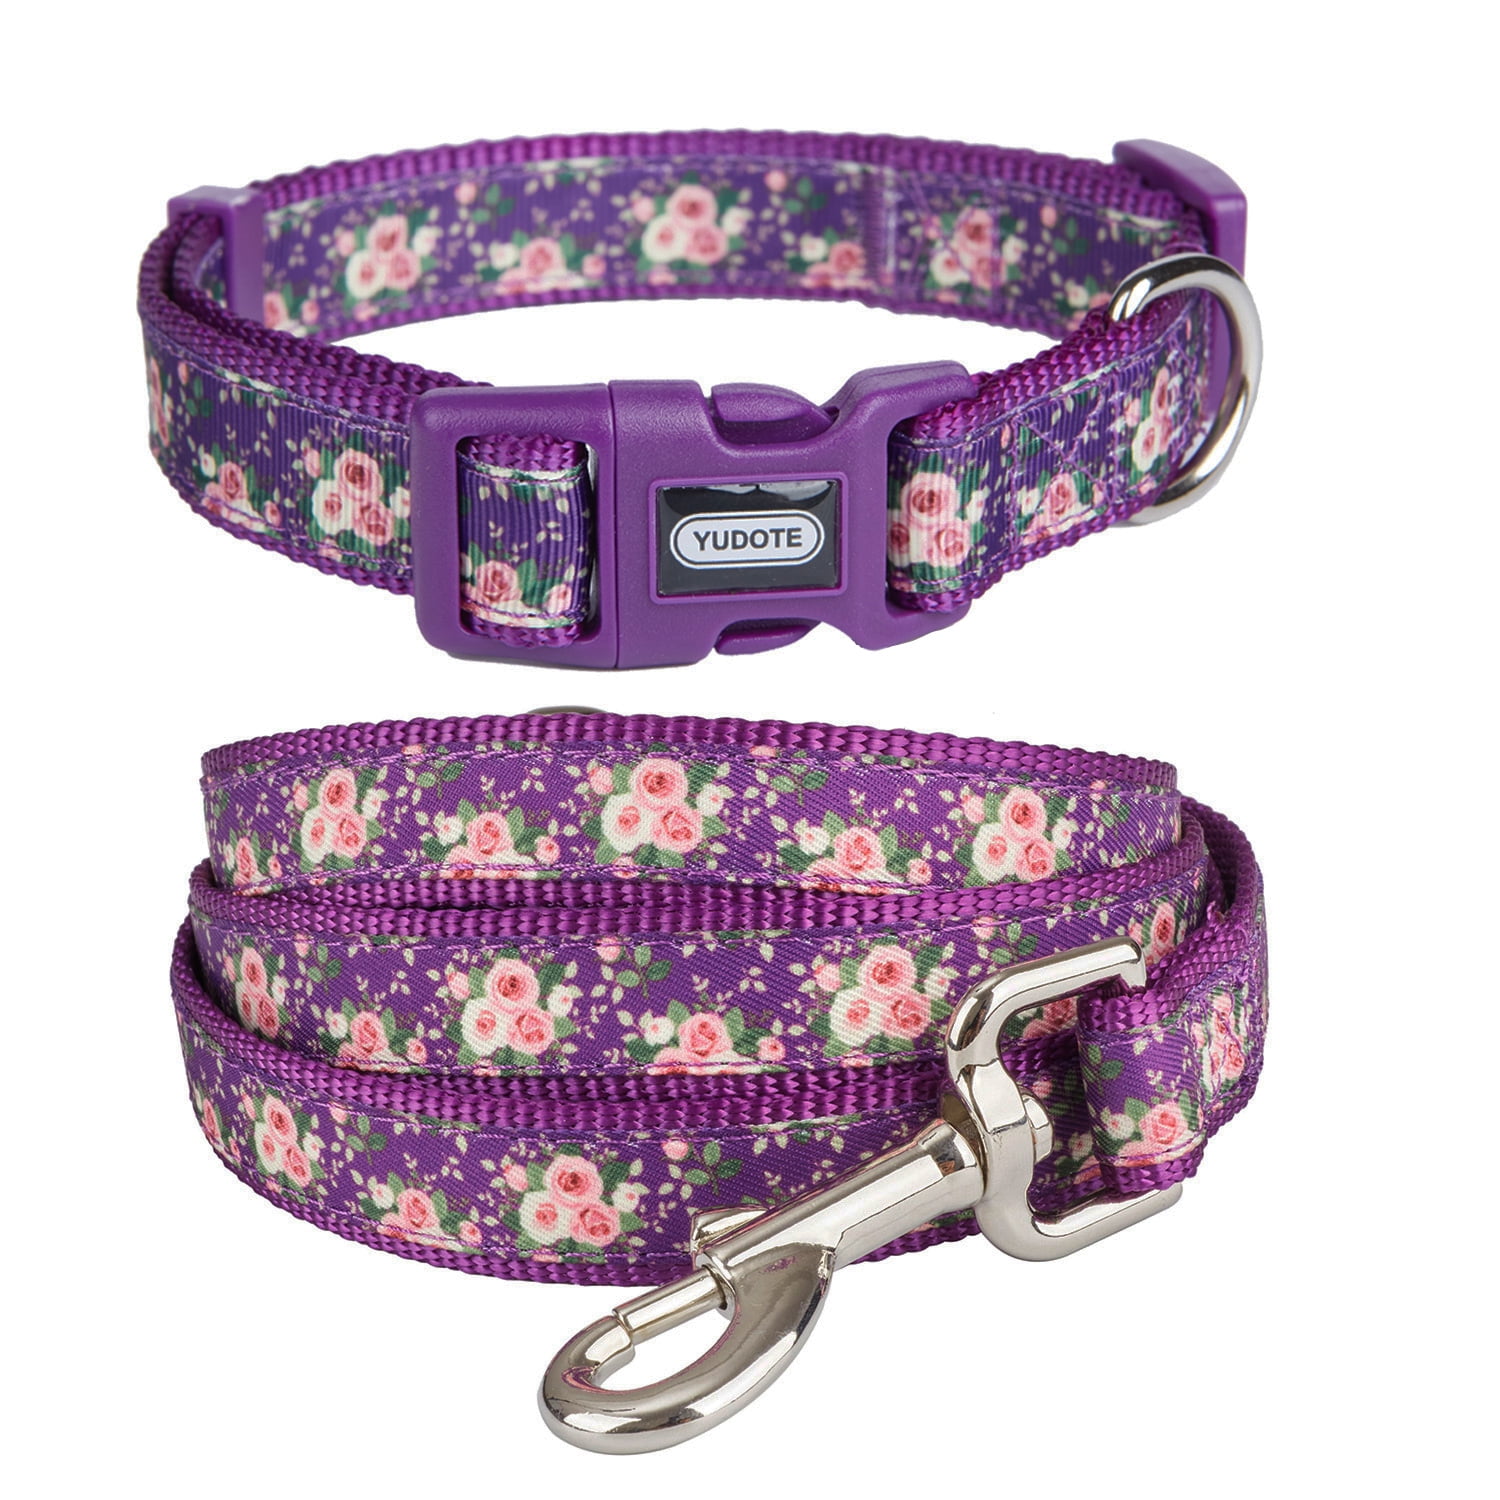 Lucky Love Dog Combo Set, Floral Dog Collar and Leash Set for Small Dogs,  Cute Girl Matching Collar & Leash Set, Part of Purchase Donated to Rescue